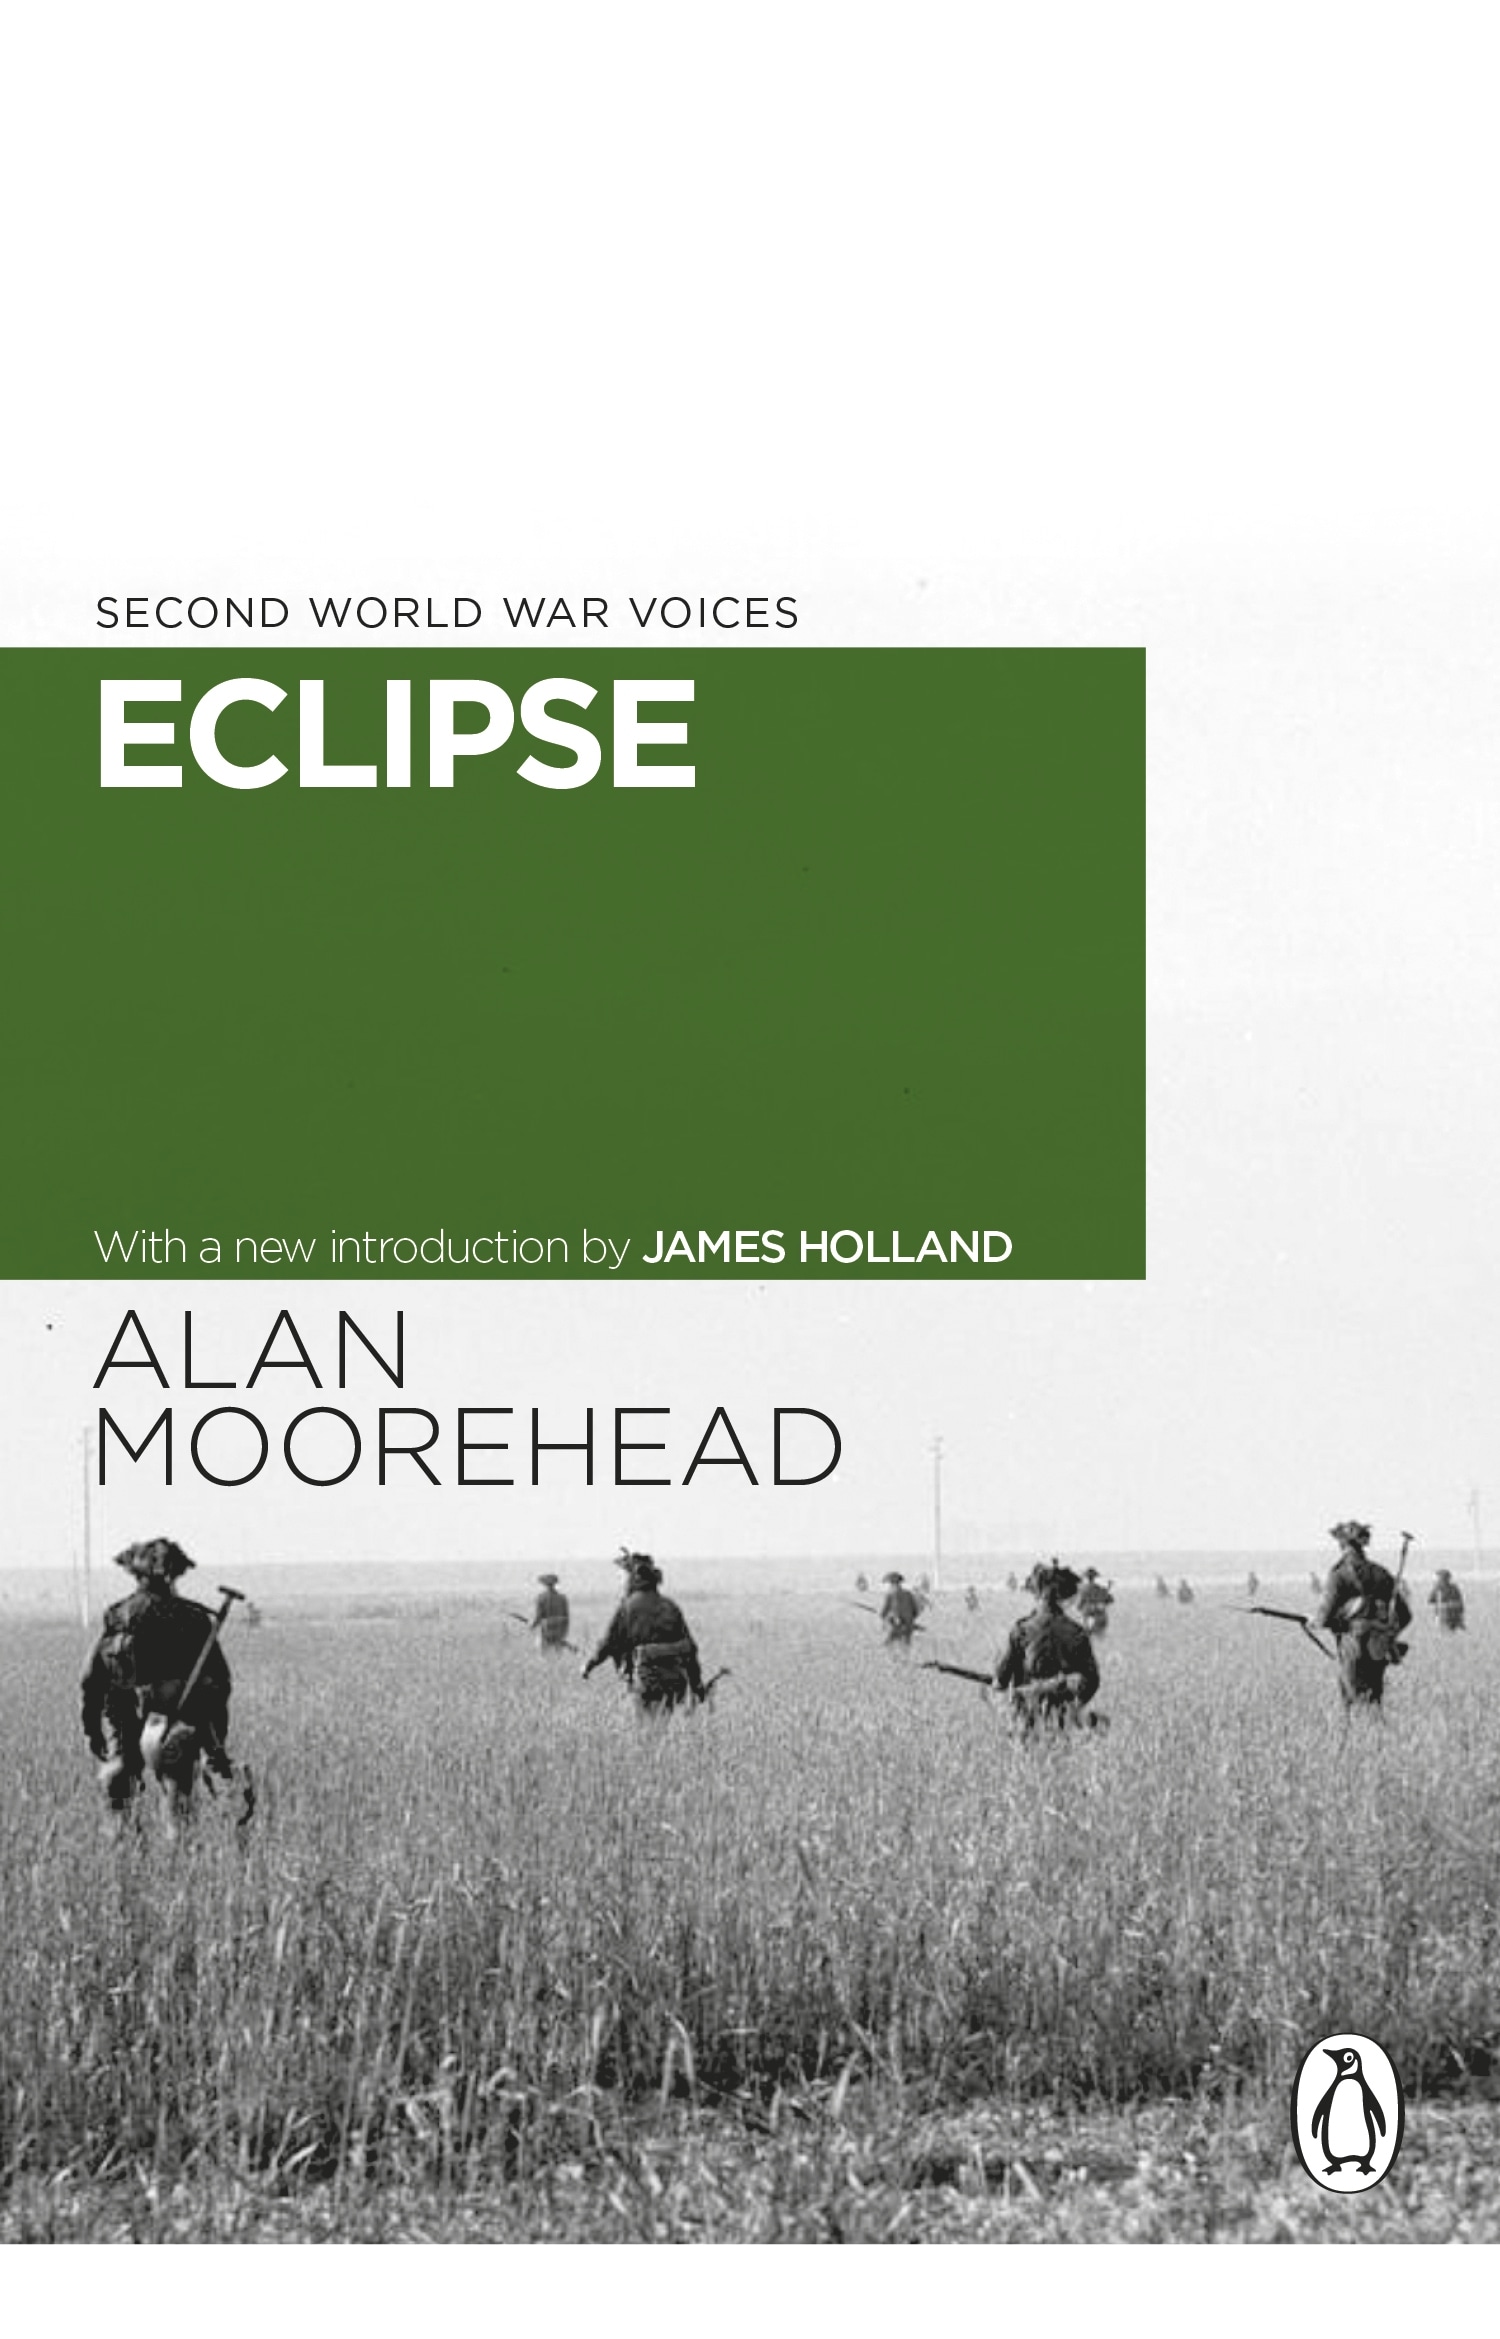 Book “Eclipse” by Alan Moorehead — December 8, 2022